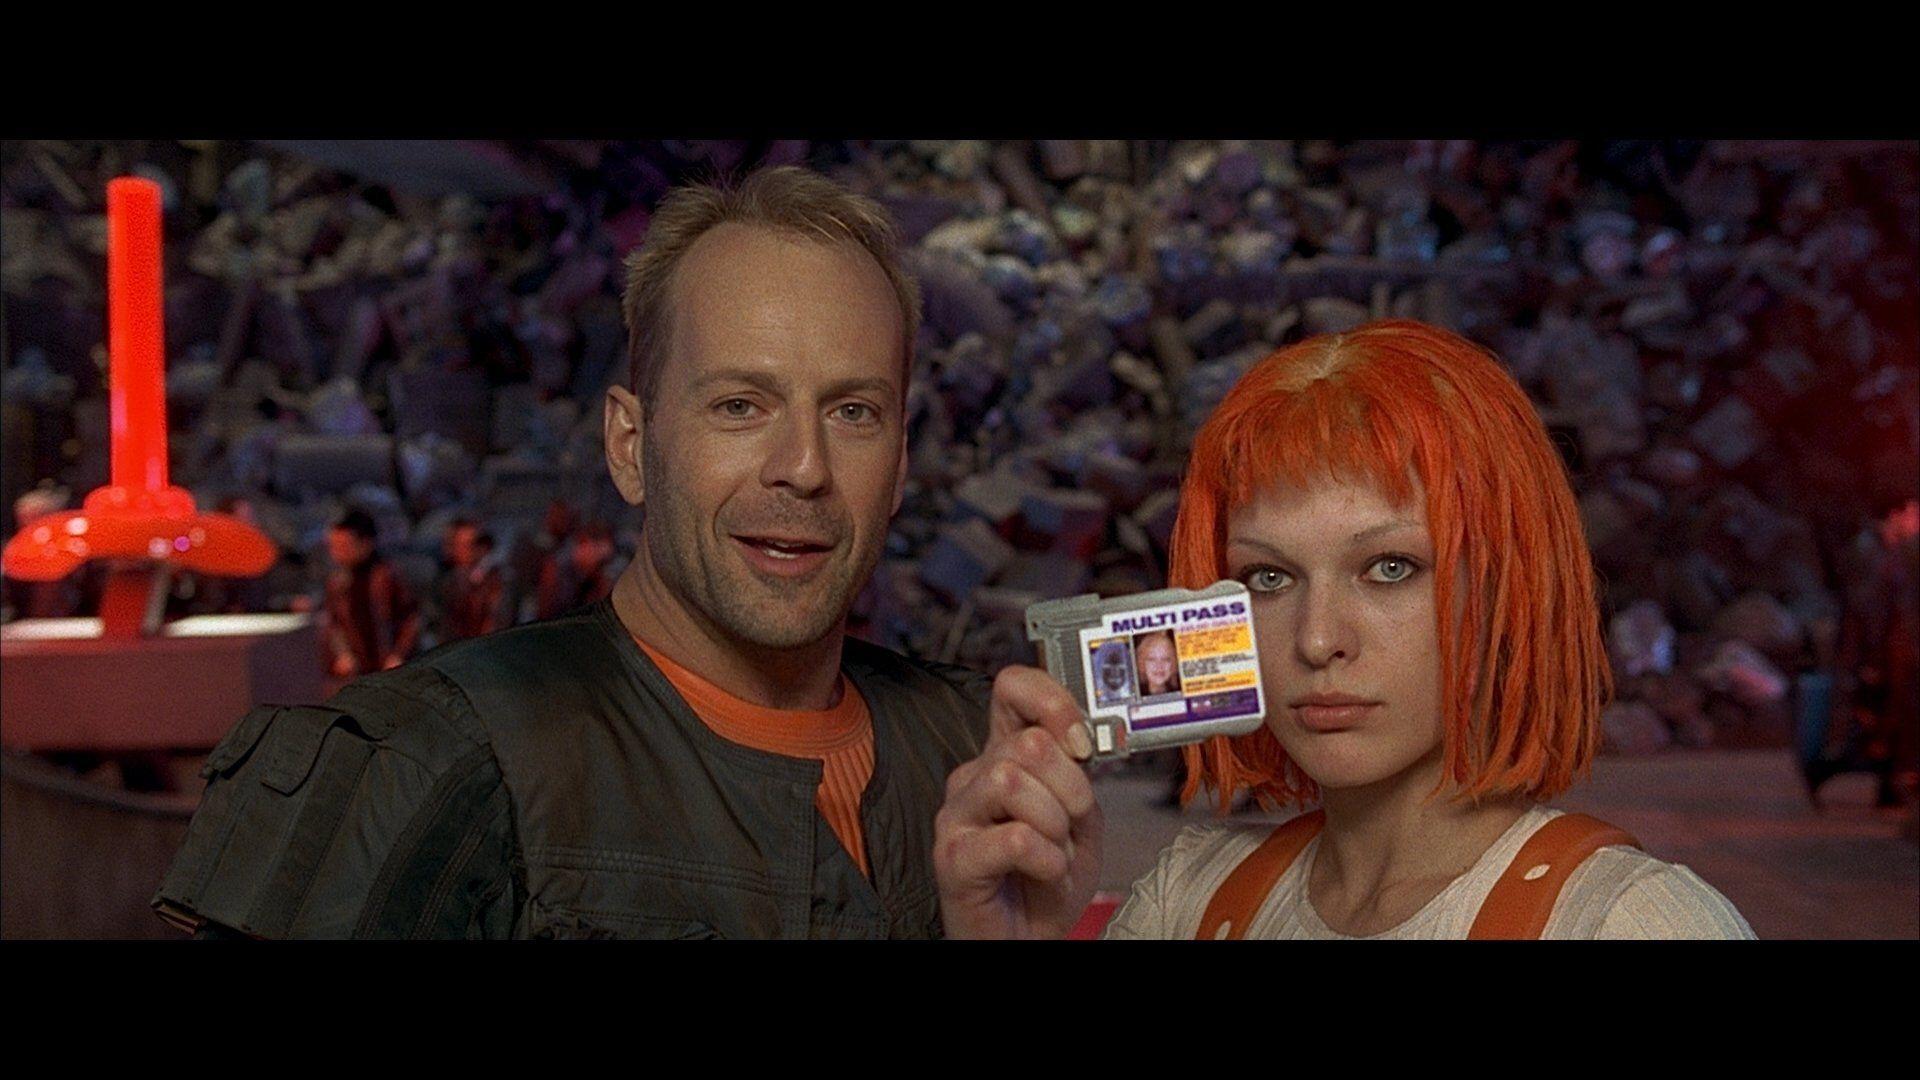 watch the fifth element in hd online free